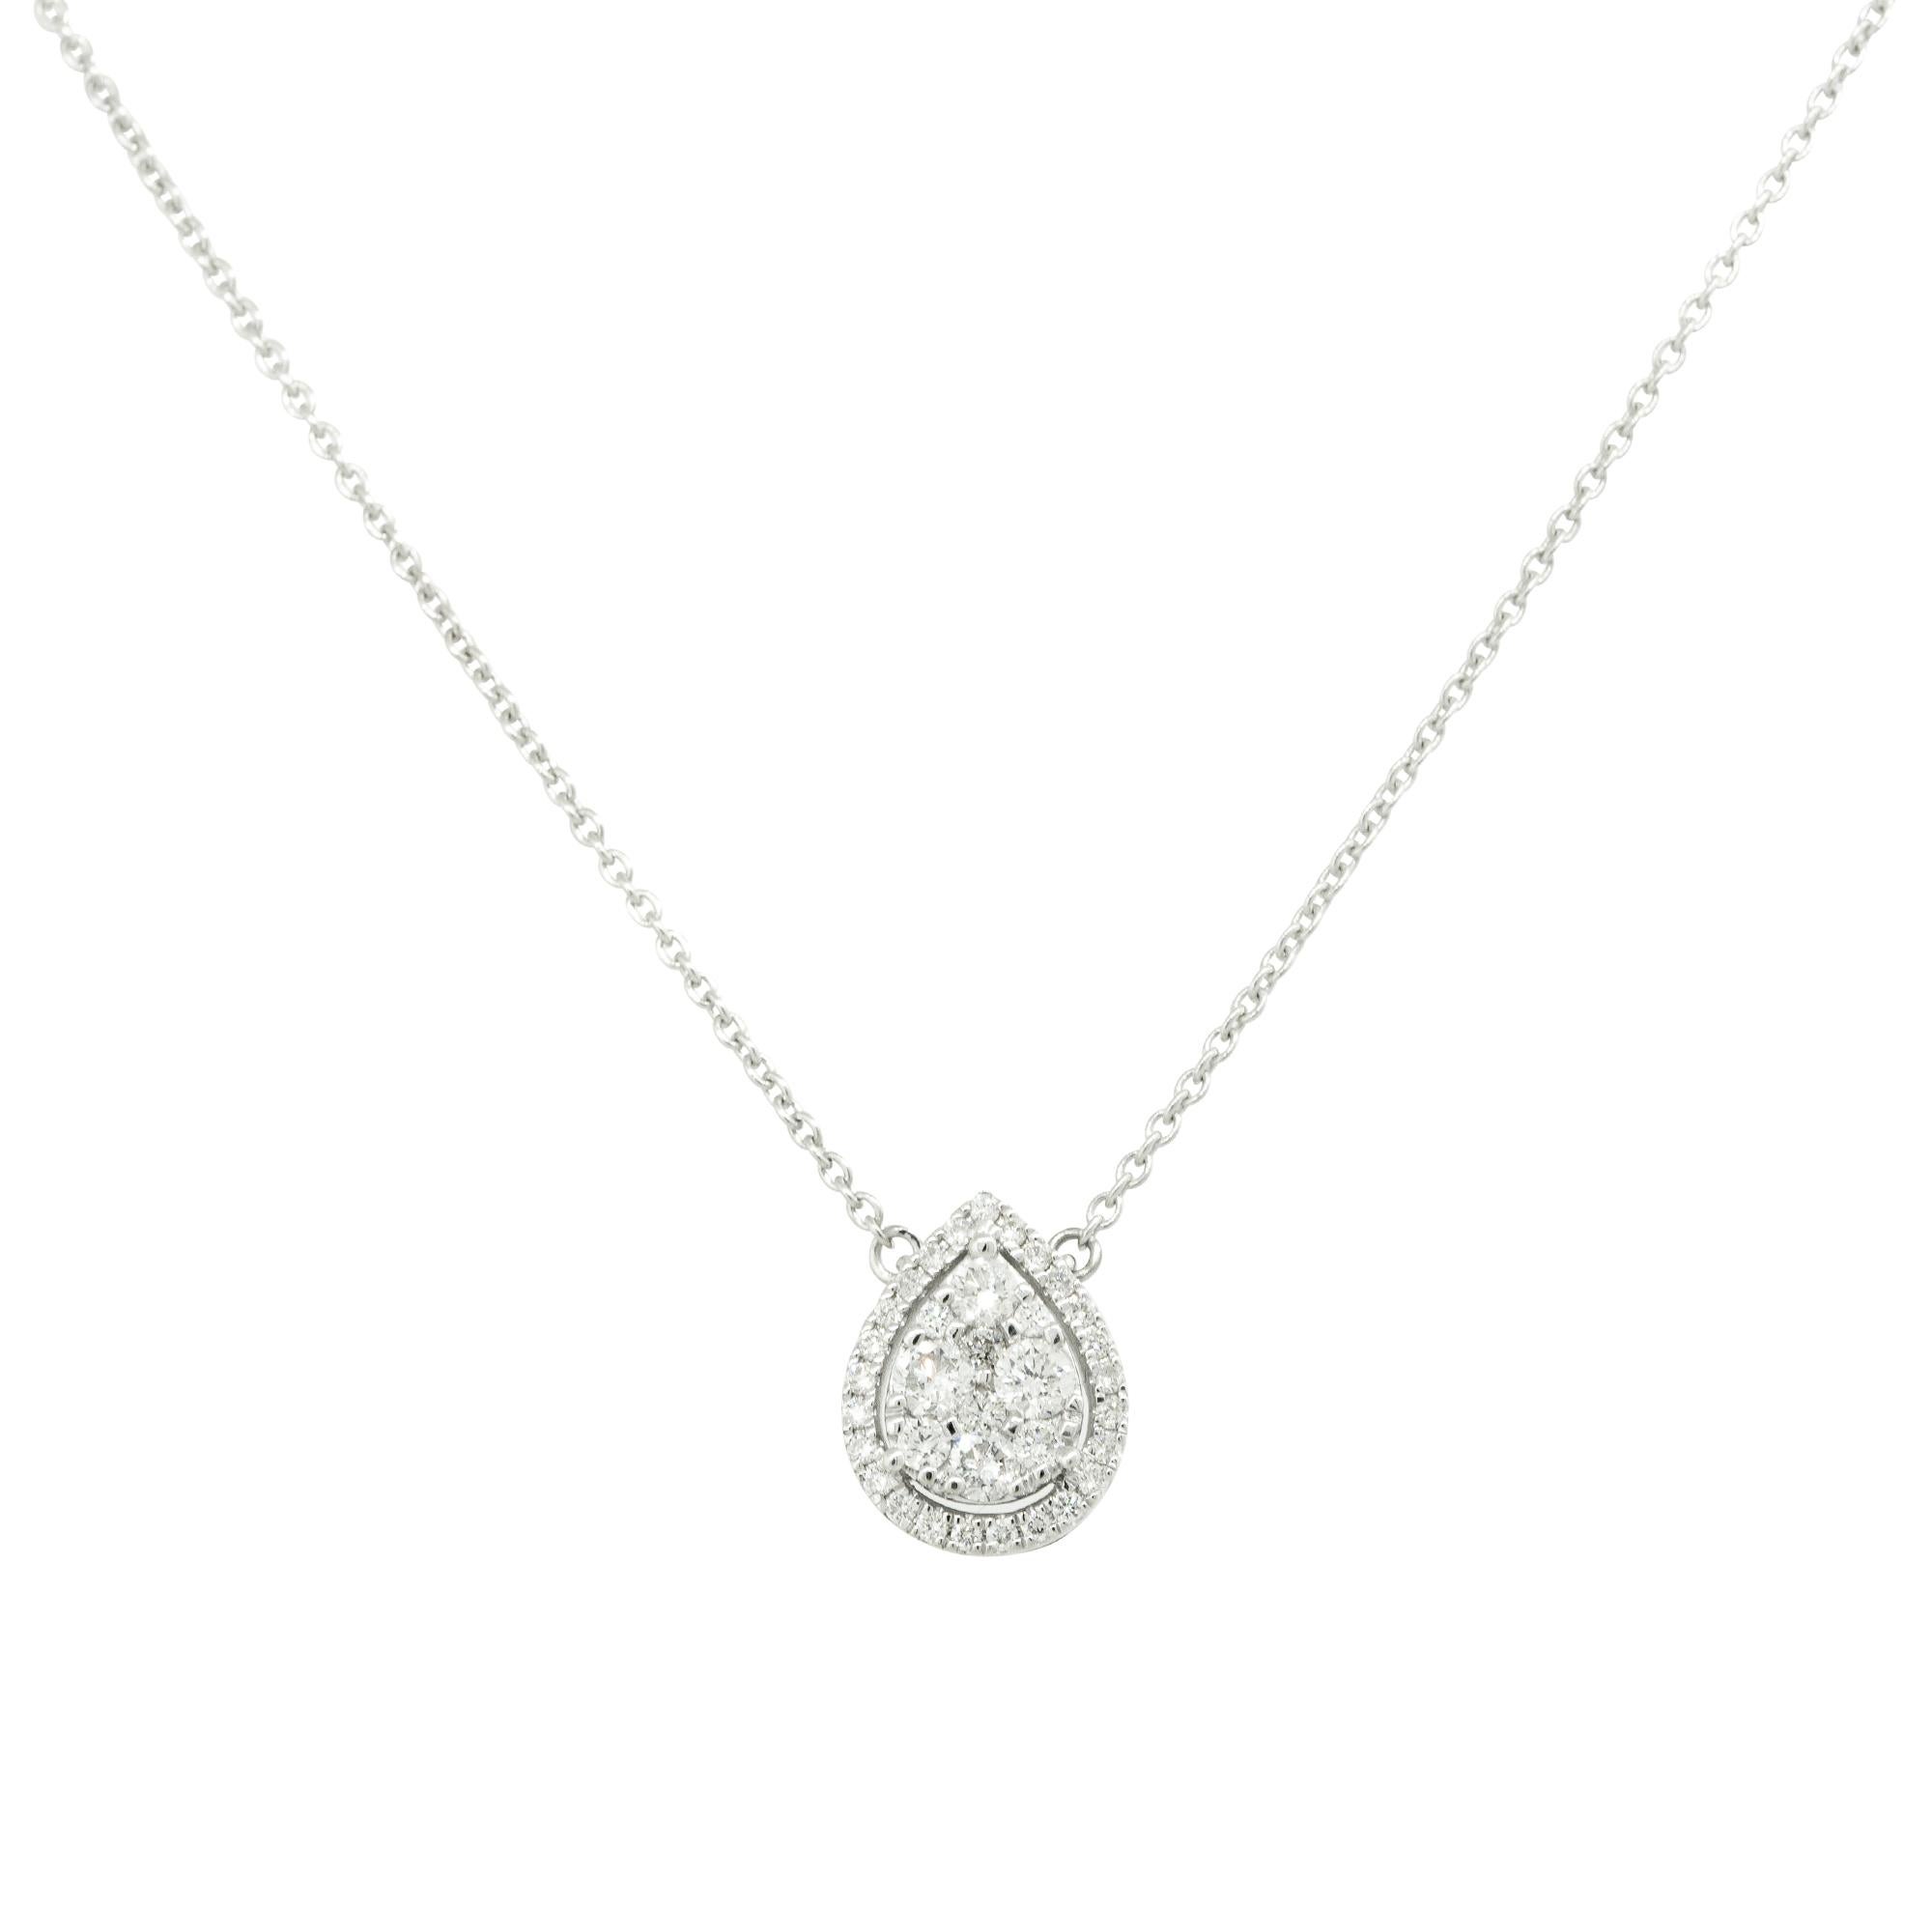 14k White Gold 0.50ctw Pave Diamond Pear Shaped Necklace

Style: Pear Shaped Drop Diamond Necklace
Material: 14k White Gold
Diamond Details: Approximately 0.50ctw of Round Brilliant Diamonds.
Diamonds are pave set into the shape of a pear.
There are